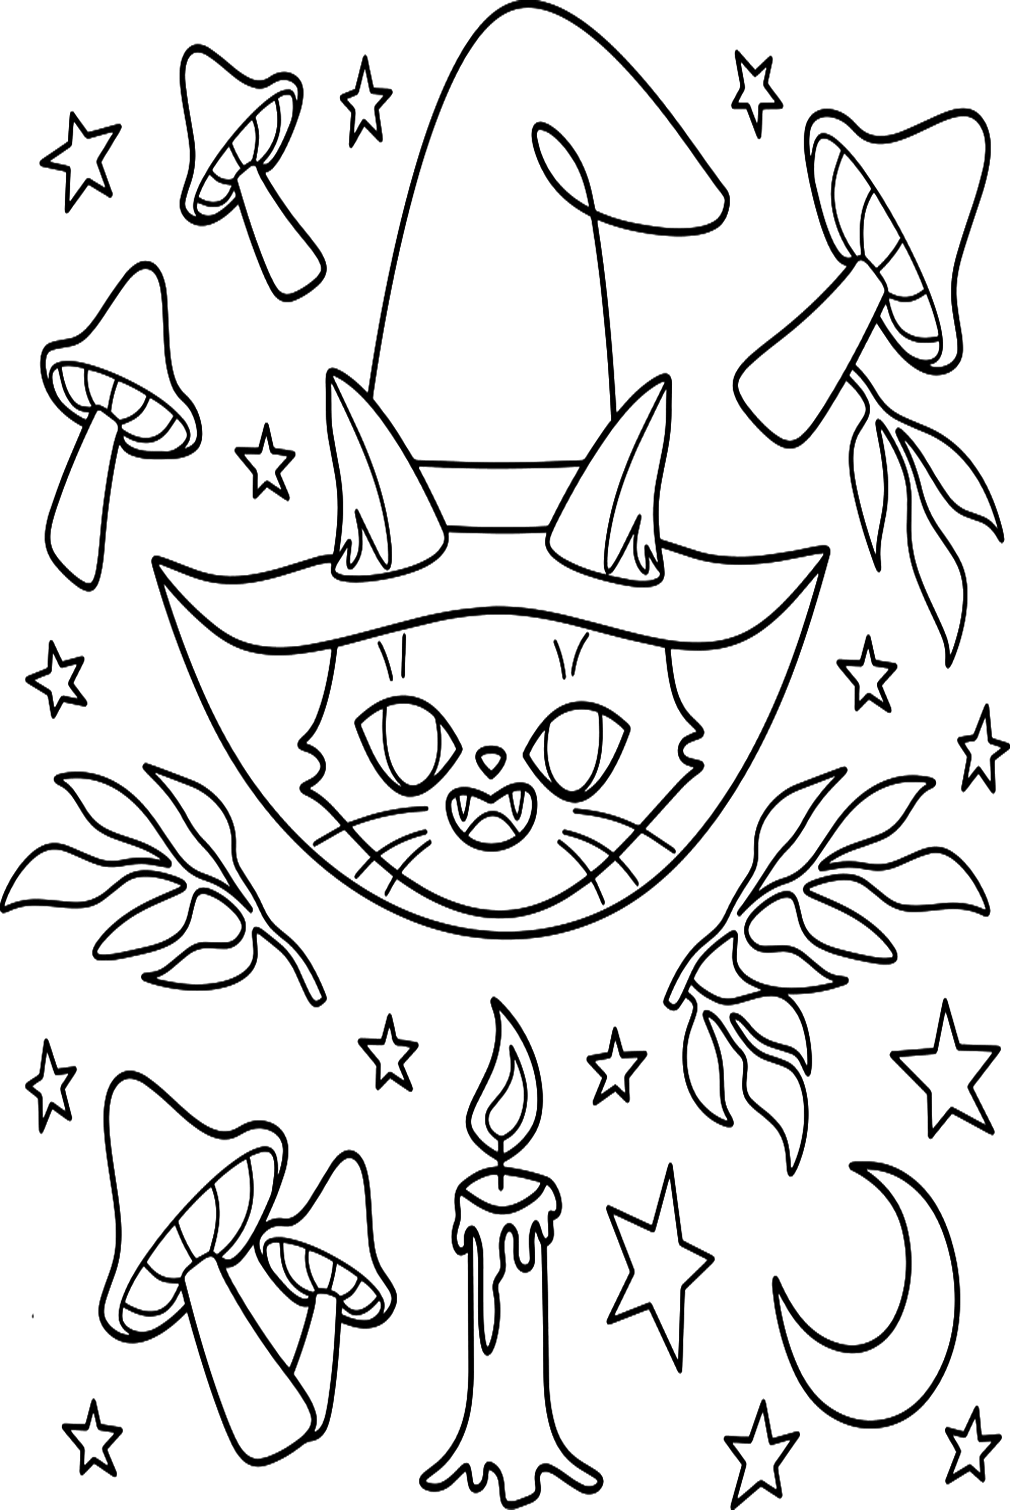 Witch Hat Coloring Sheet